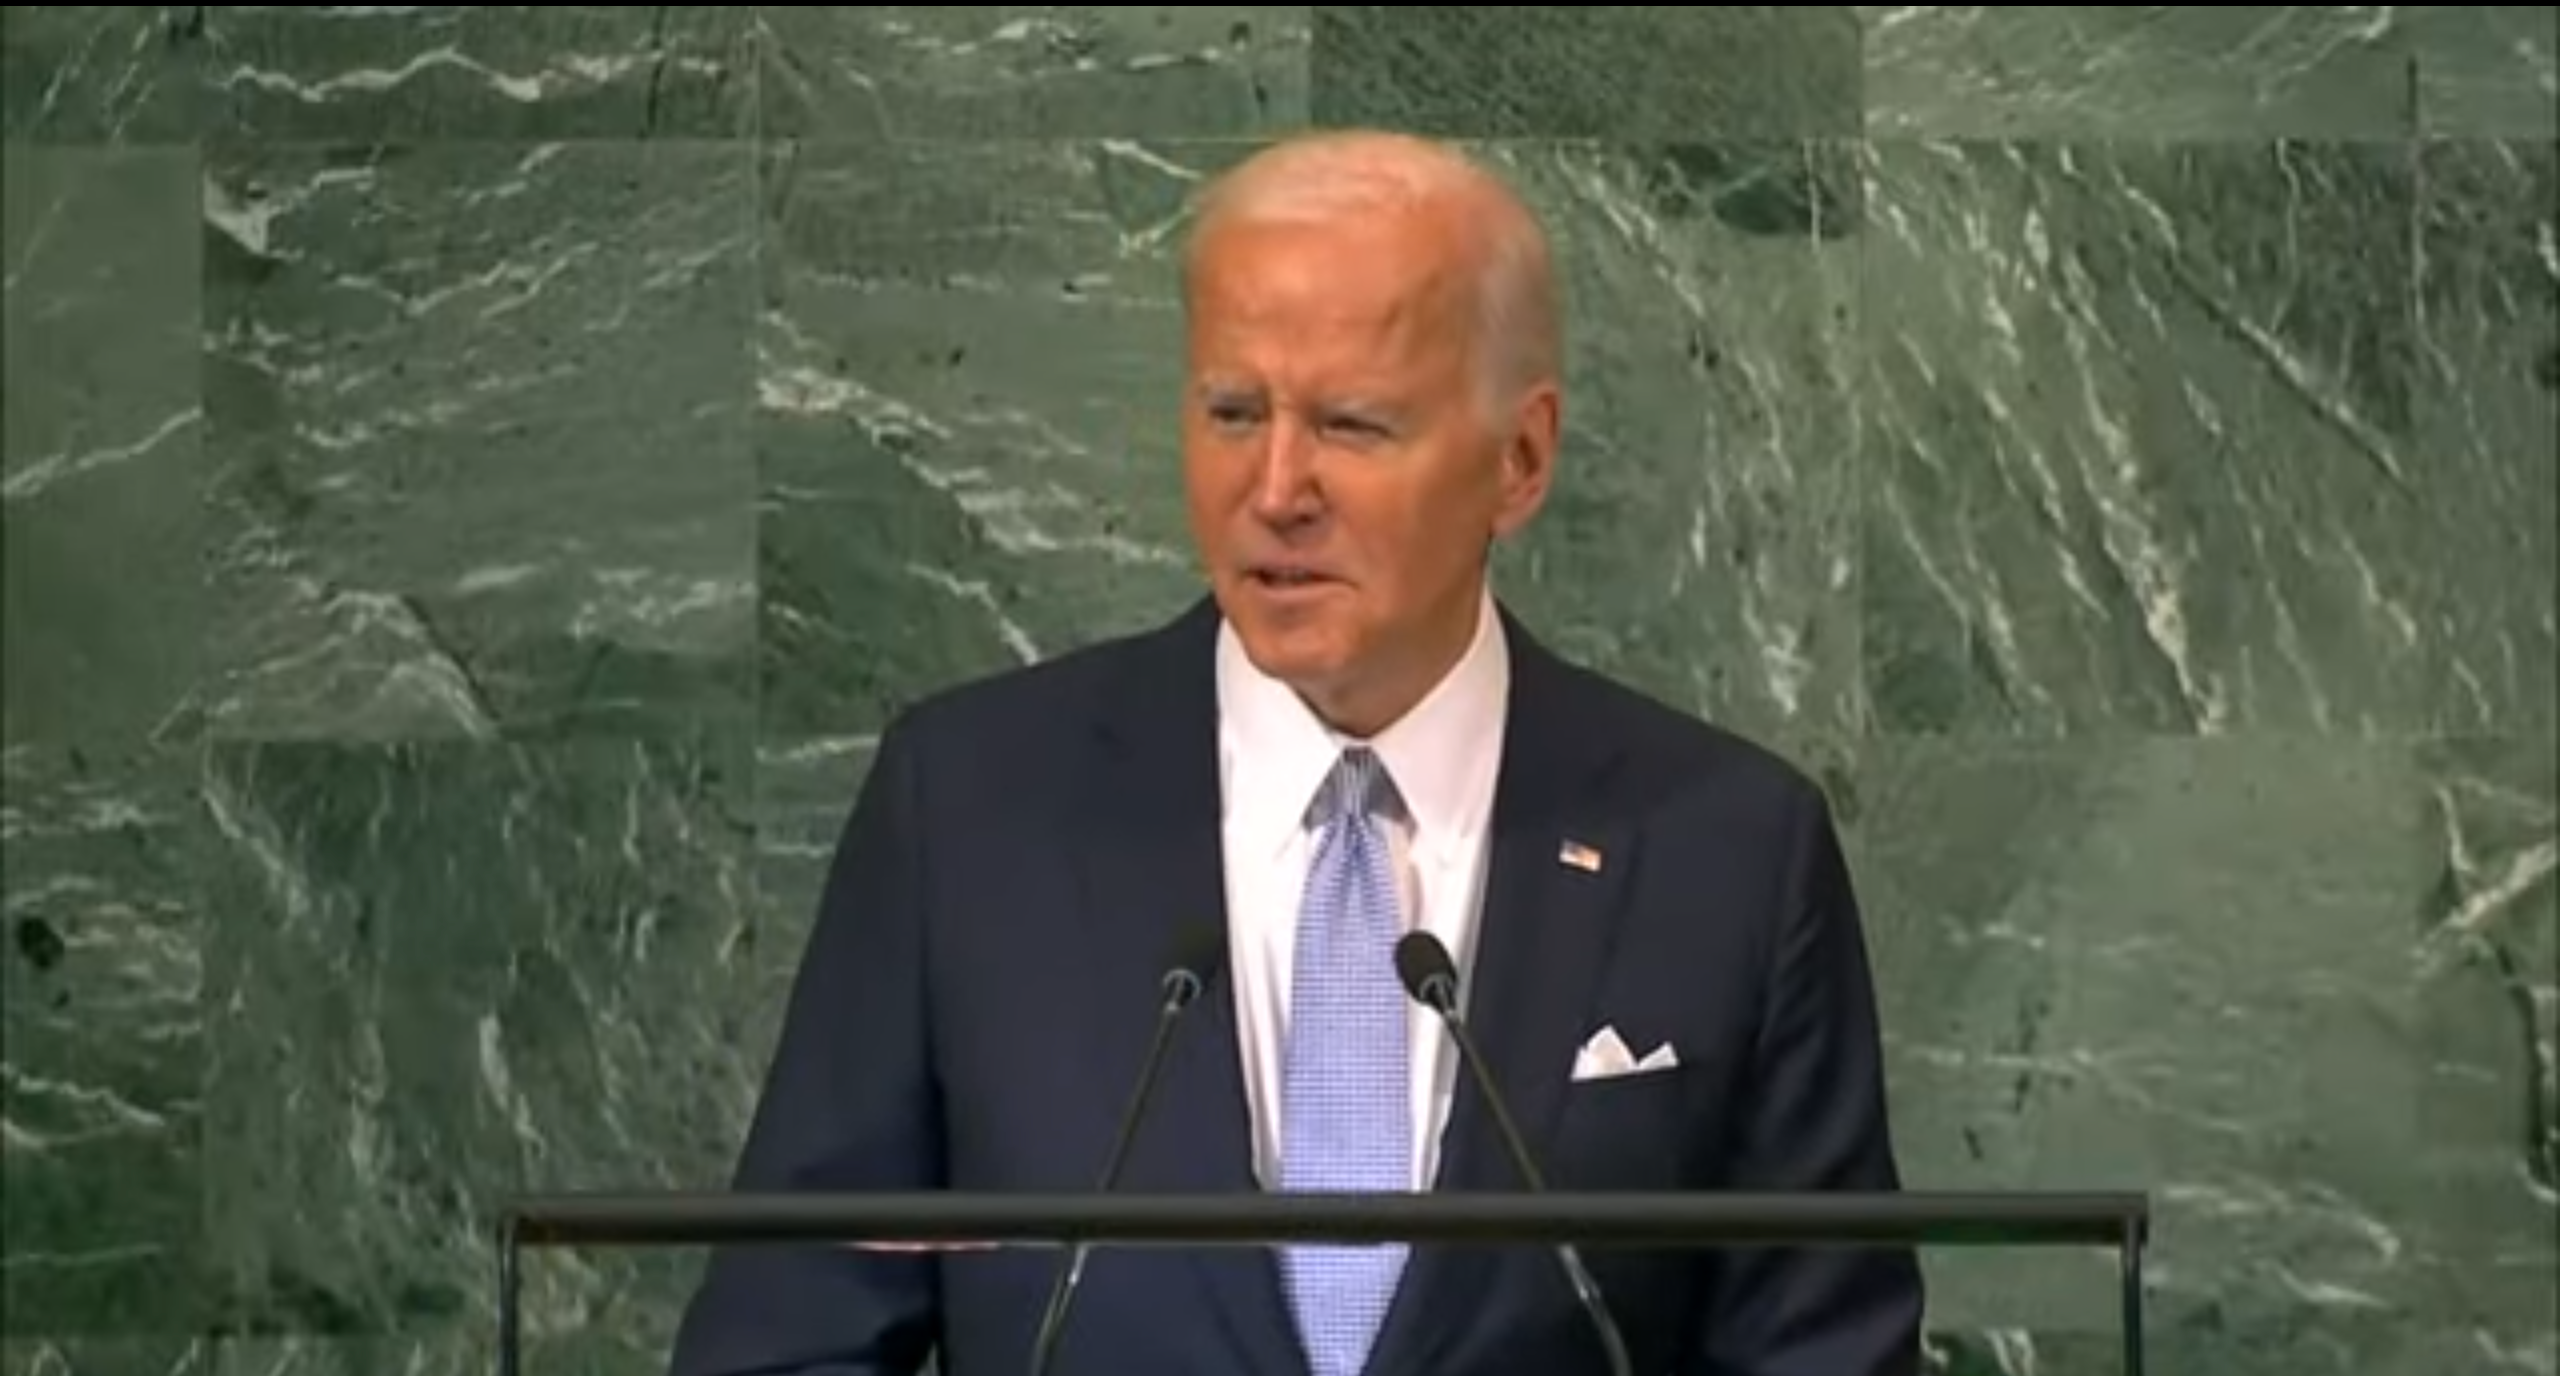 Biden Calls Out Putin For 'Lies' And 'Overt Nuclear Threats' At UN Appearance